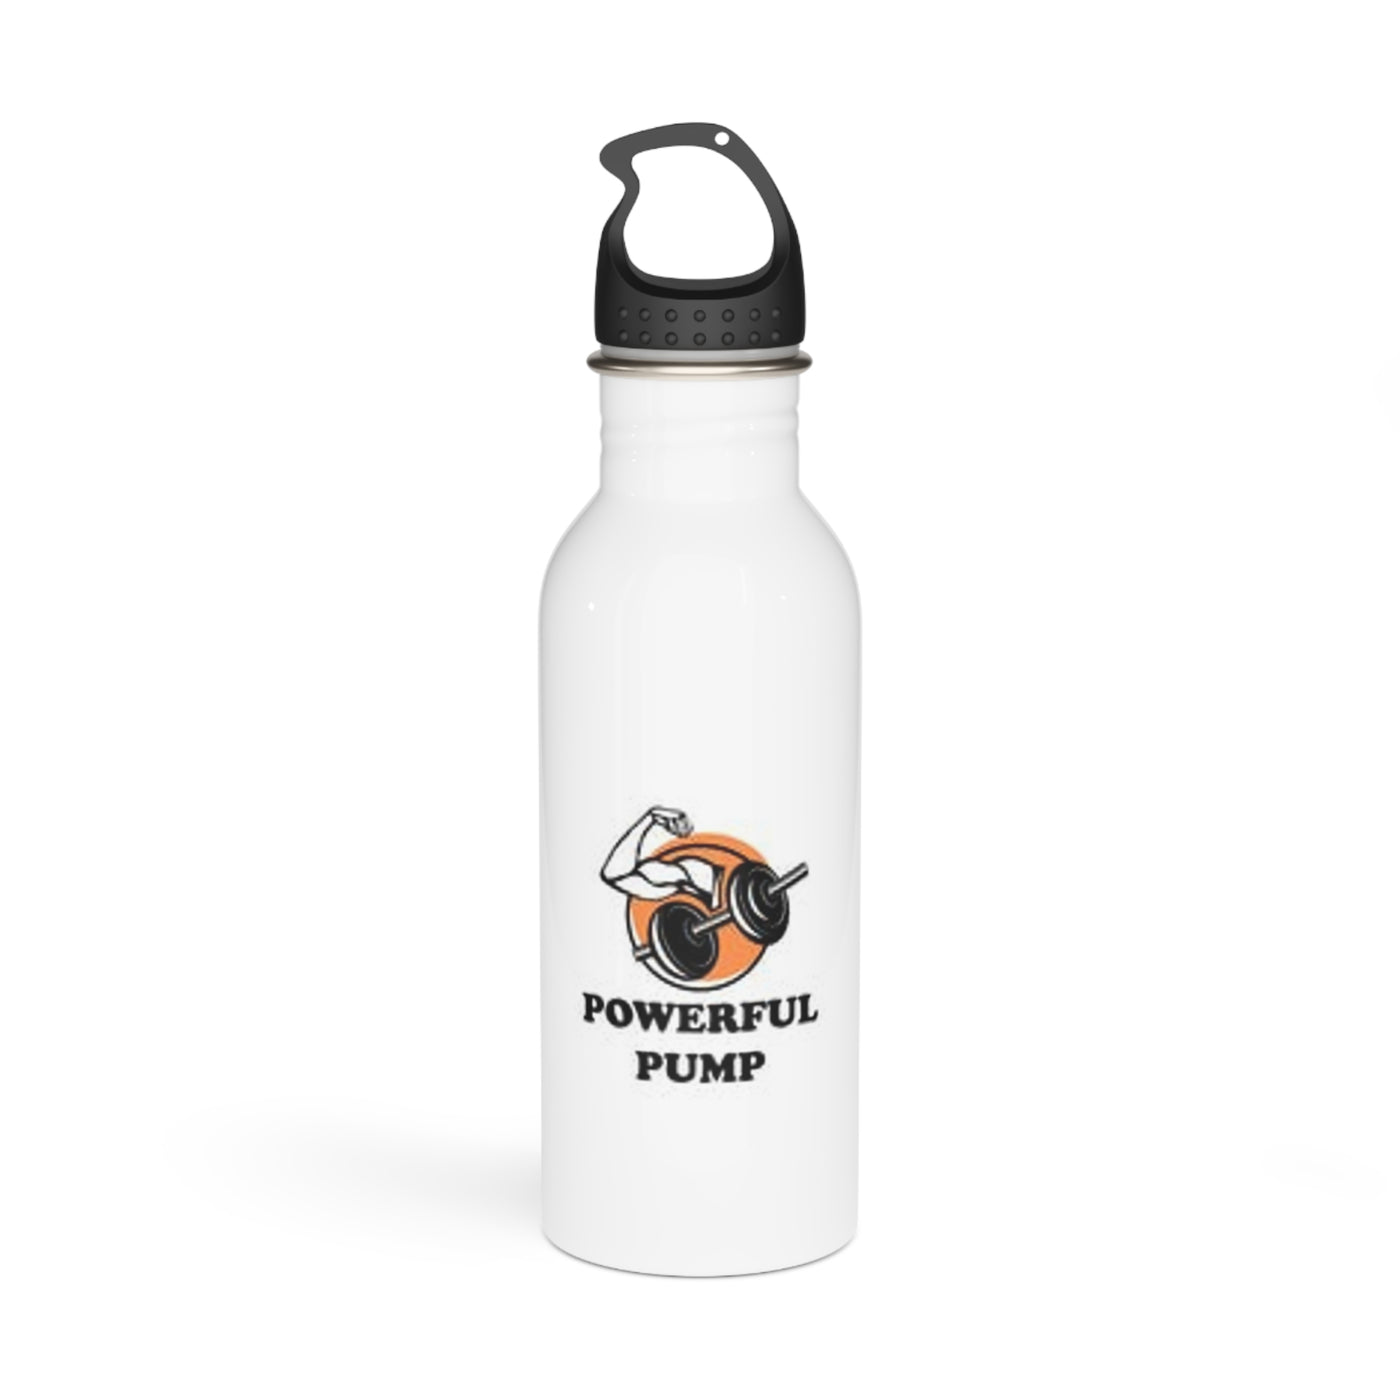 Fitness Stainless Steel Water Bottle - Durable, reusable water bottle designed for fitness enthusiasts, ideal for hydration during workouts and daily activities.